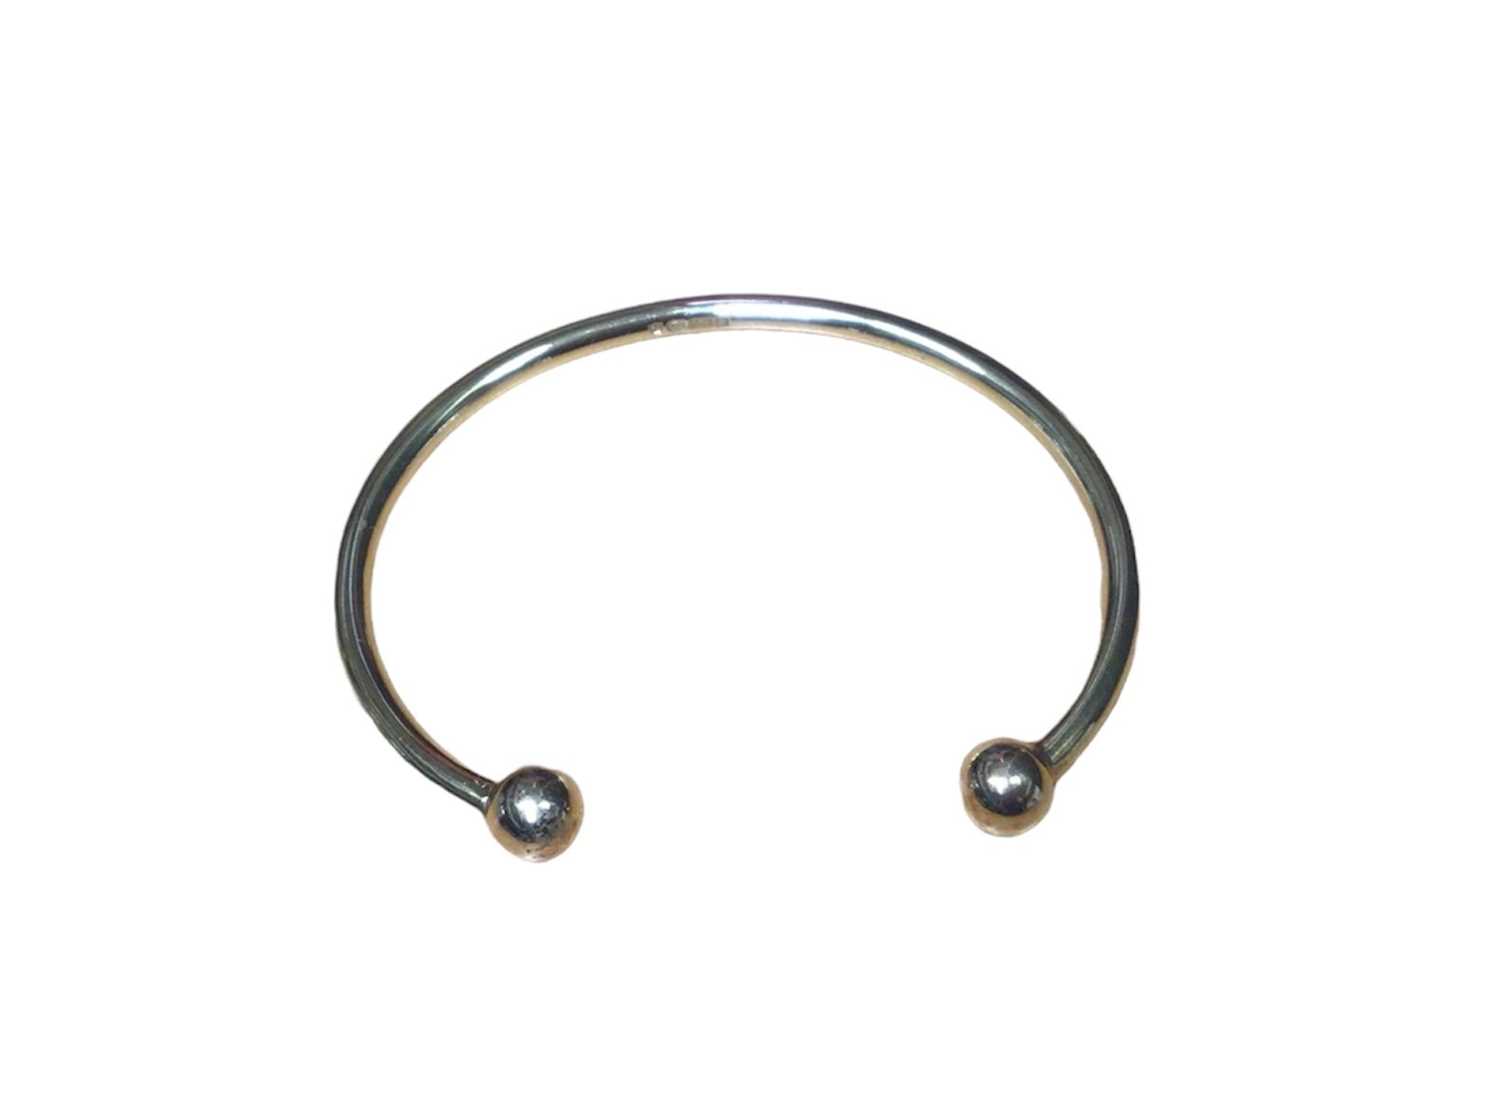 Lot 19 - 9ct gold torque bangle with ball terminals